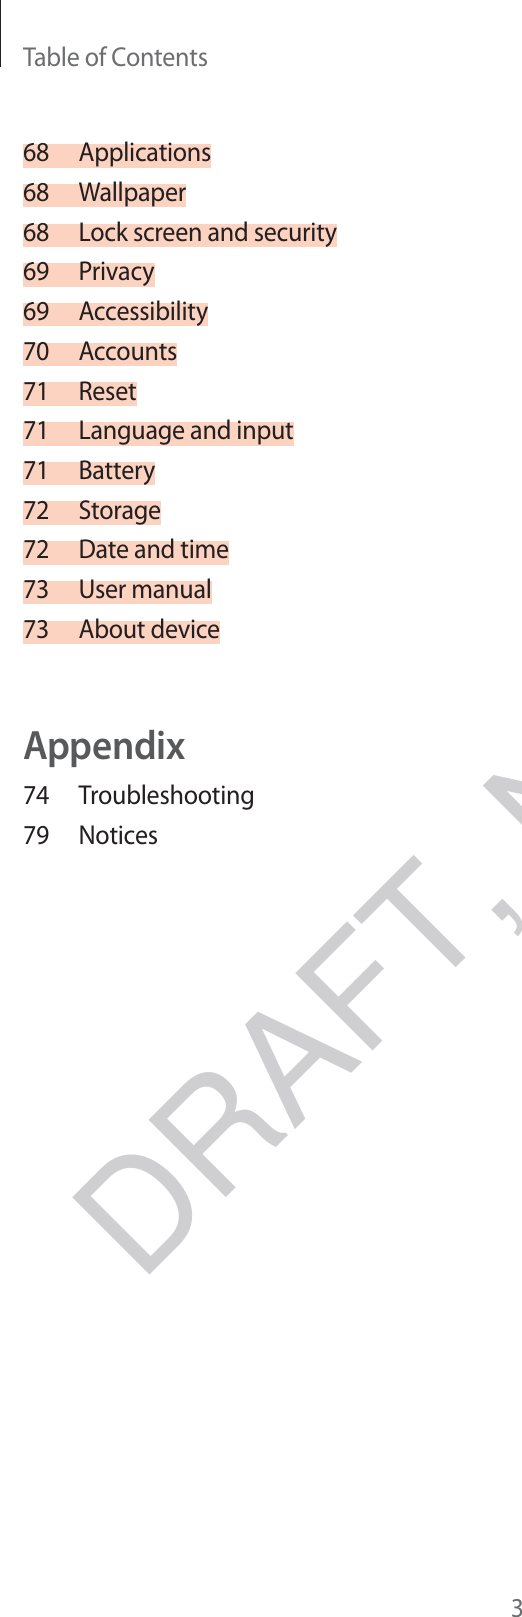 Table of Contents368 Applications68 Wallpaper68  Lock screen and security69 Privacy69 Accessibility70 Accounts71 Reset71  Language and input71 Battery72 Storage72  Date and time73 User manual73 About deviceAppendix74 Troubleshooting79 NoticesDRAFT, Not Final